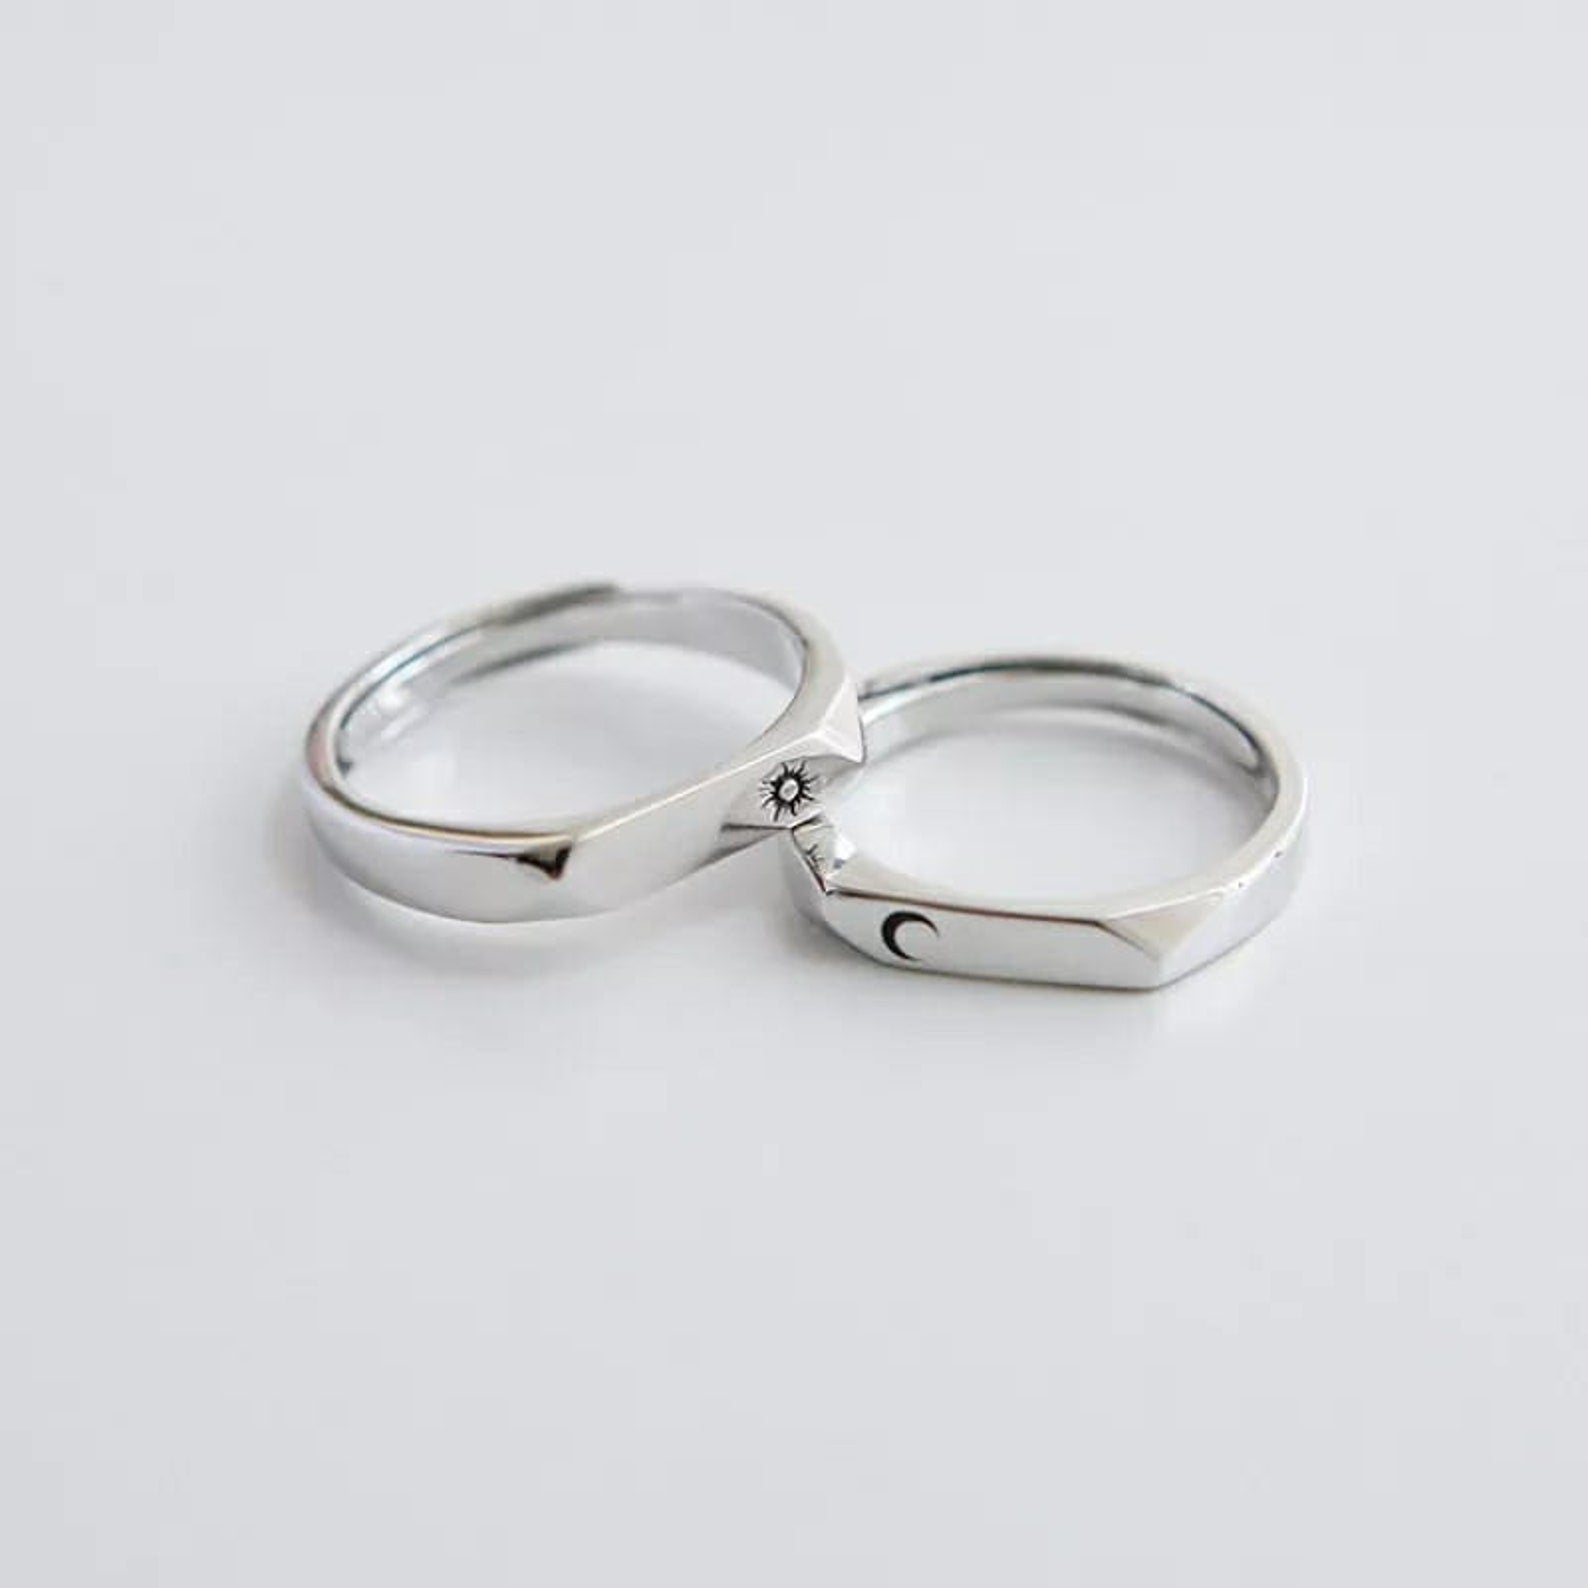 Couples Fingerprint Ring Set | Fast Delivery Crafted by Silvery UK.